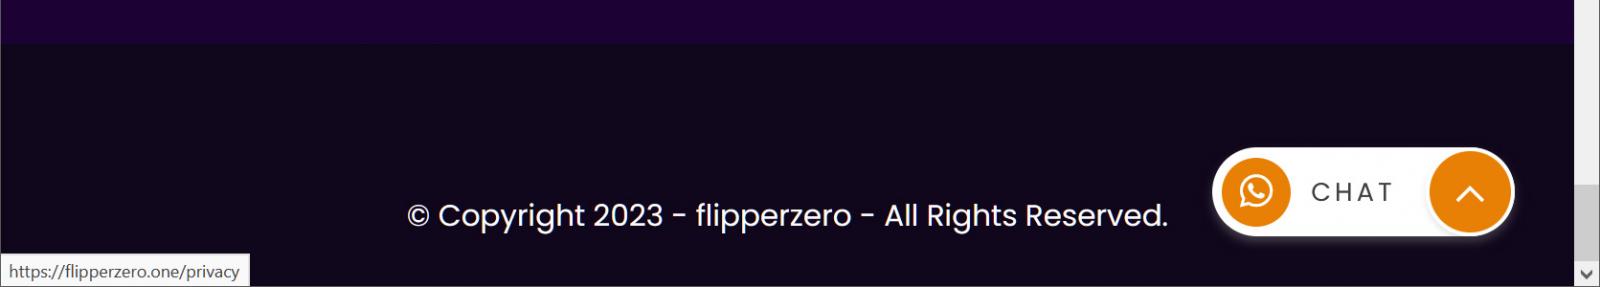 Flipperzero copyright at the bottom of page